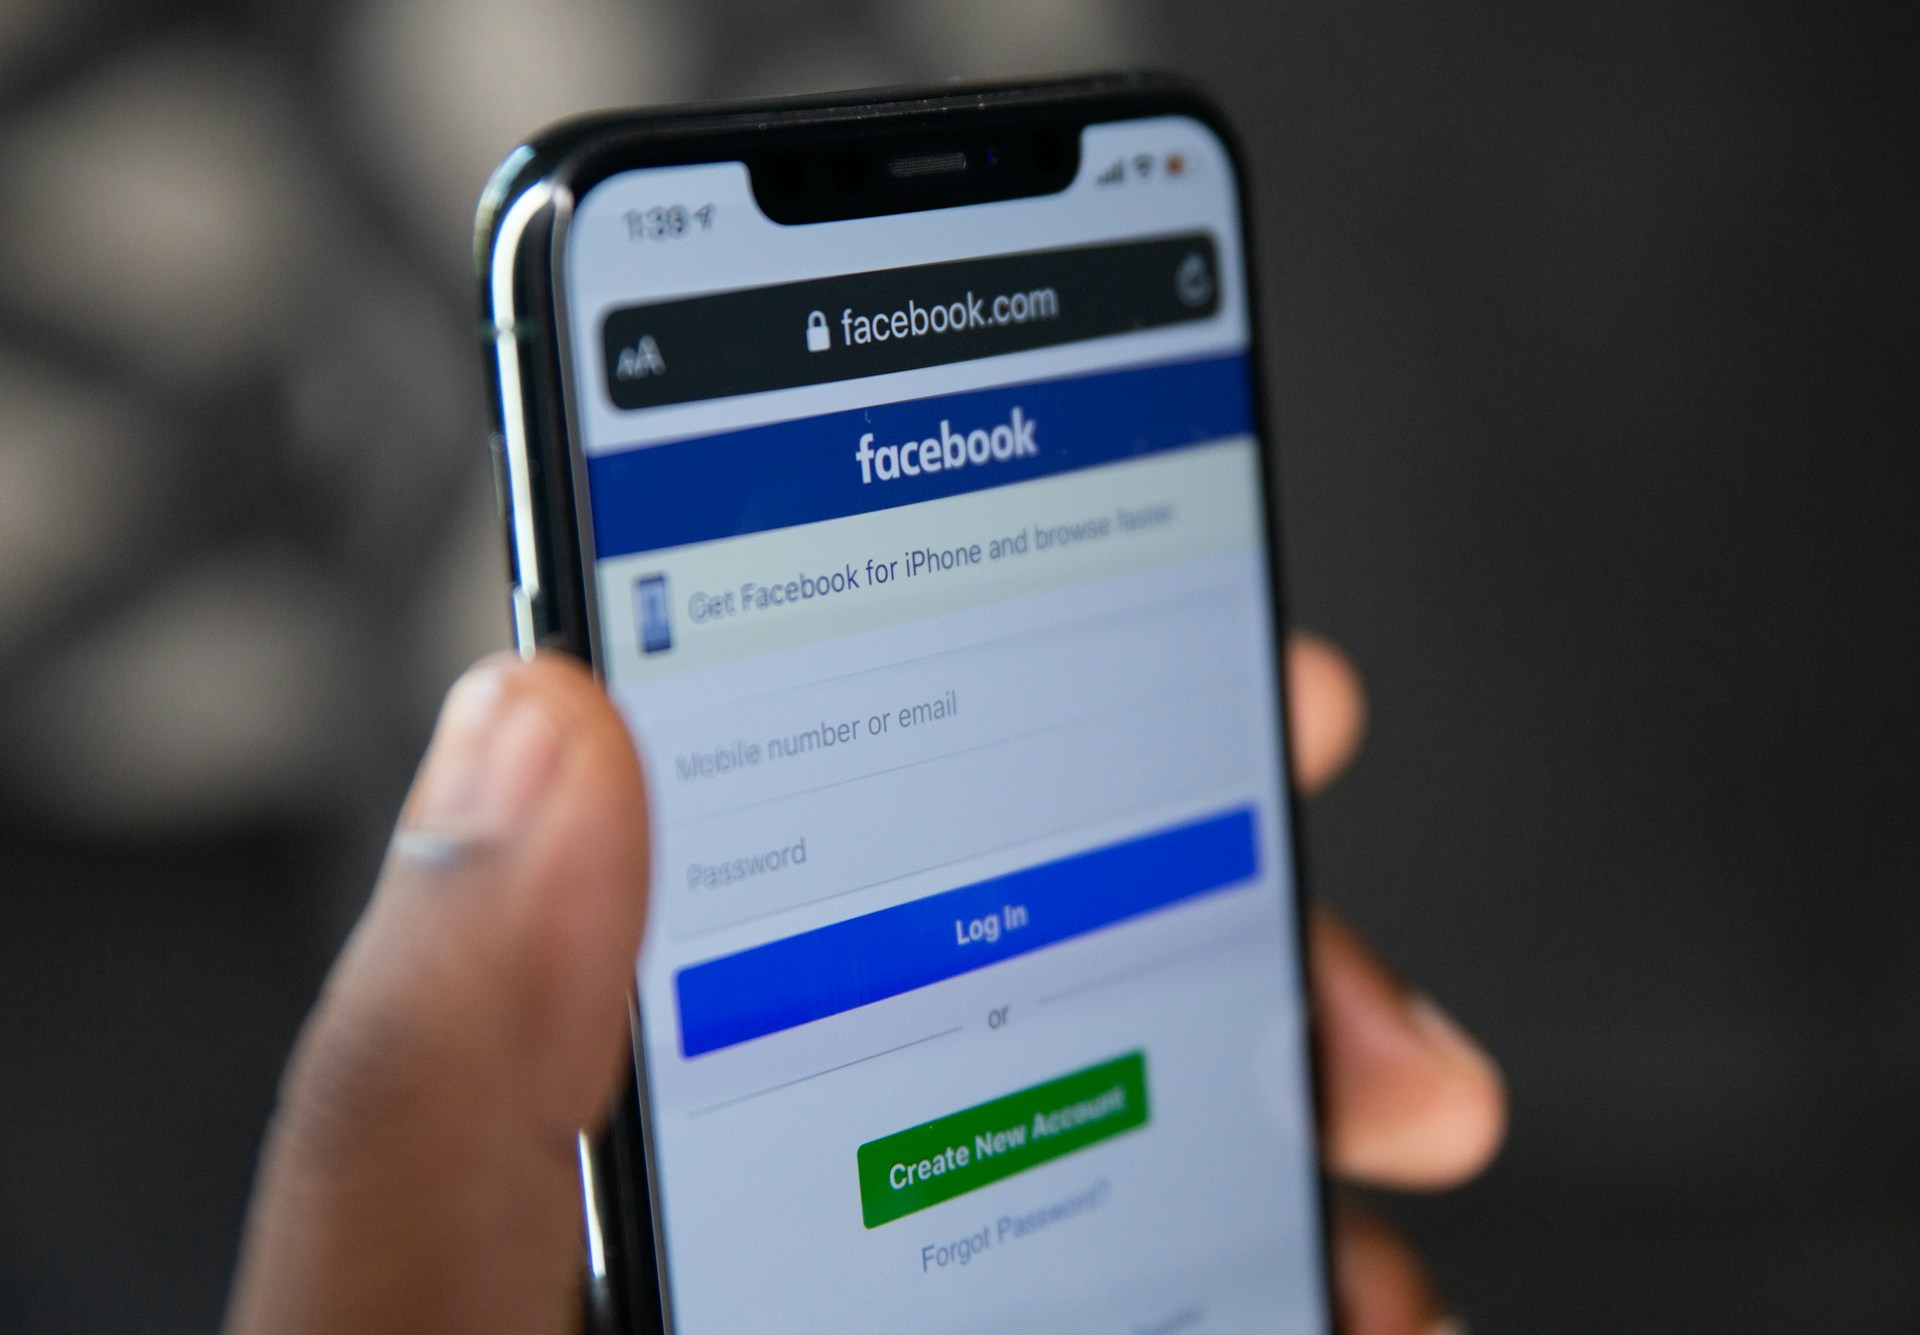 You can decide what happens to your Facebook page after you die. But unless you take action to have it memorialized or deleted, it will stay active indefinitely.